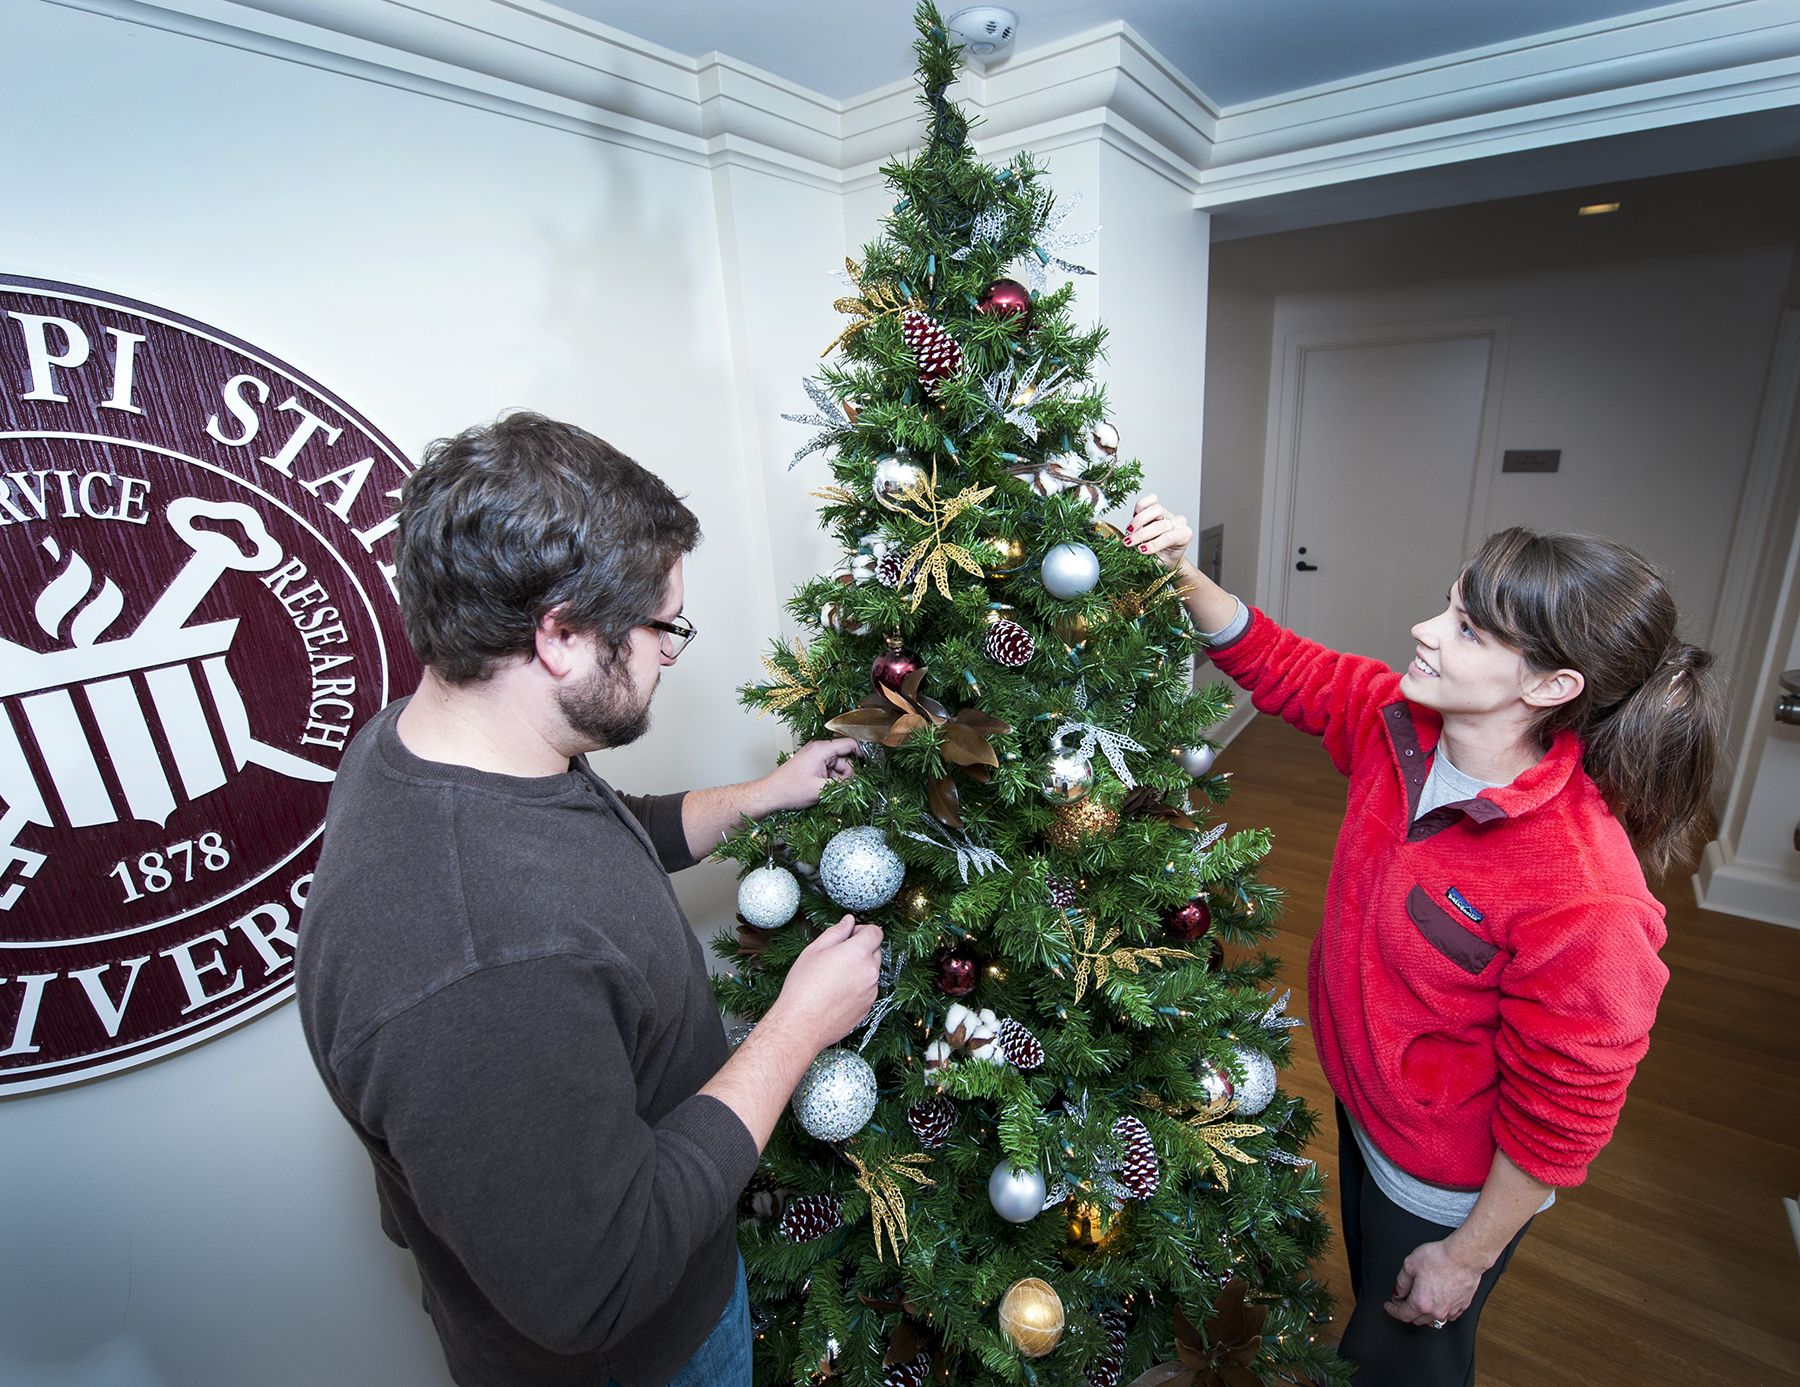 University Florist employees John B. Cetto, a junior industrial technology/manufacturing and maintenance major from Olive Branch, and Callie Paxton West, a December communication/broadcasting graduate from Tuscaloosa, Alabama, decorate a Christmas tree at the Office of the President in historic Lee Hall.